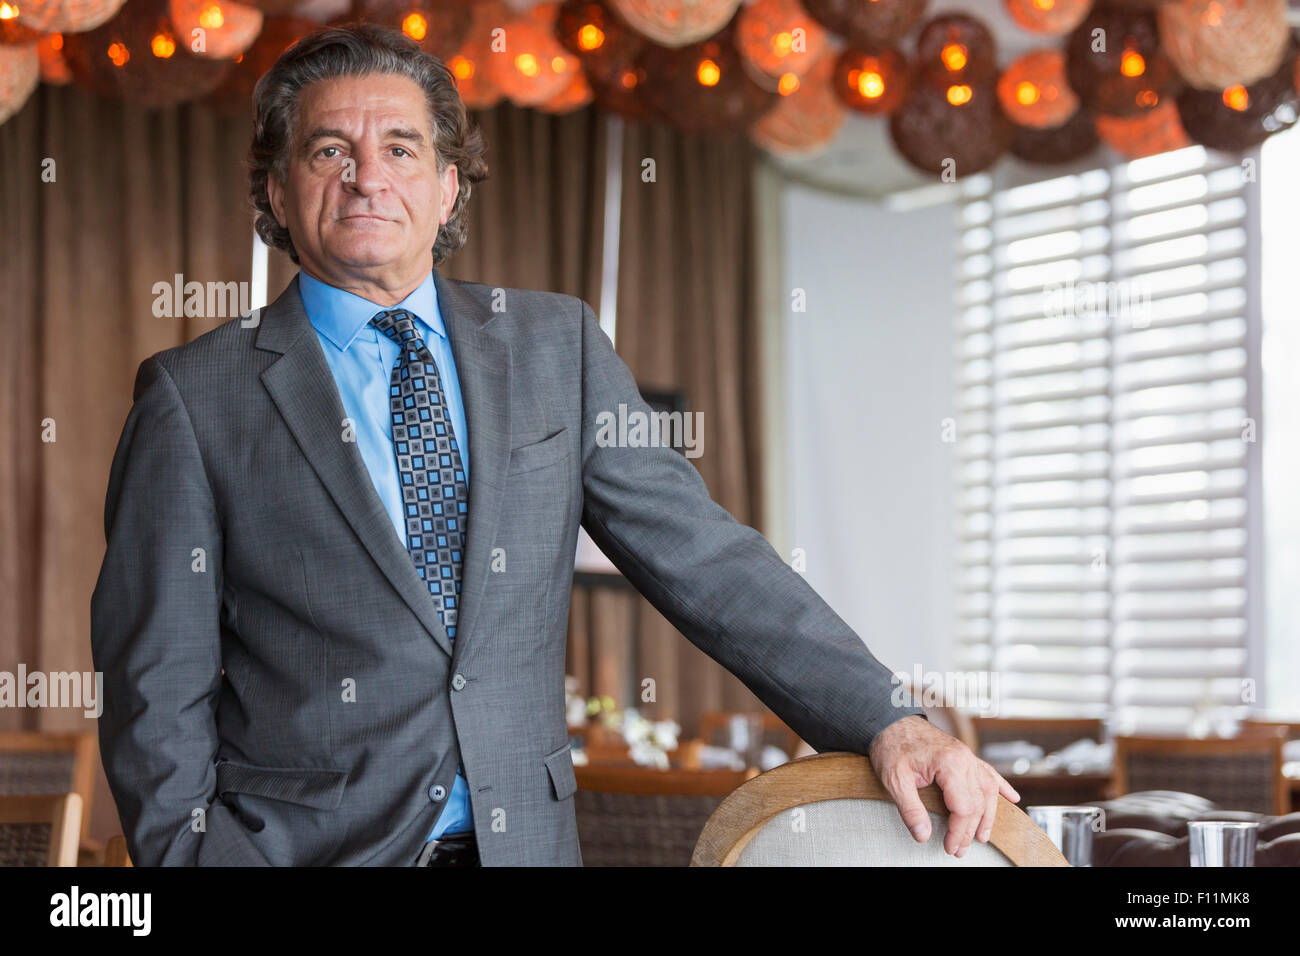 Businessman standing in dining room Stock Photo